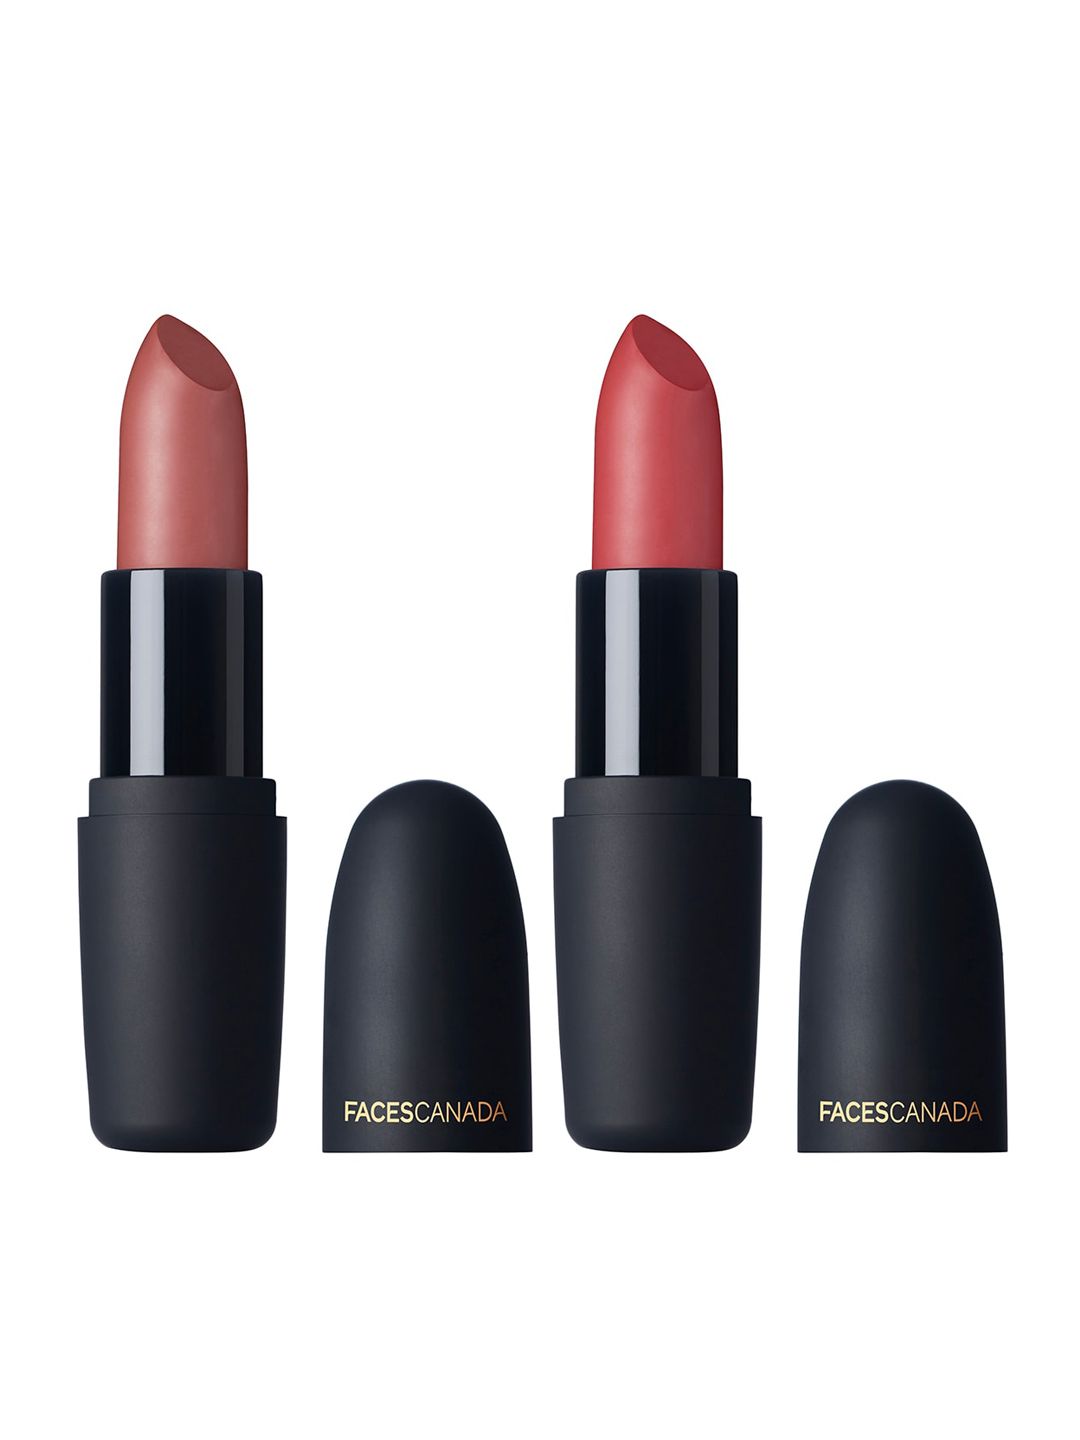 FACES CANADA Set of Weightless Matte Hydrating Lipsticks - Buff Nude & Peach Candy Price in India